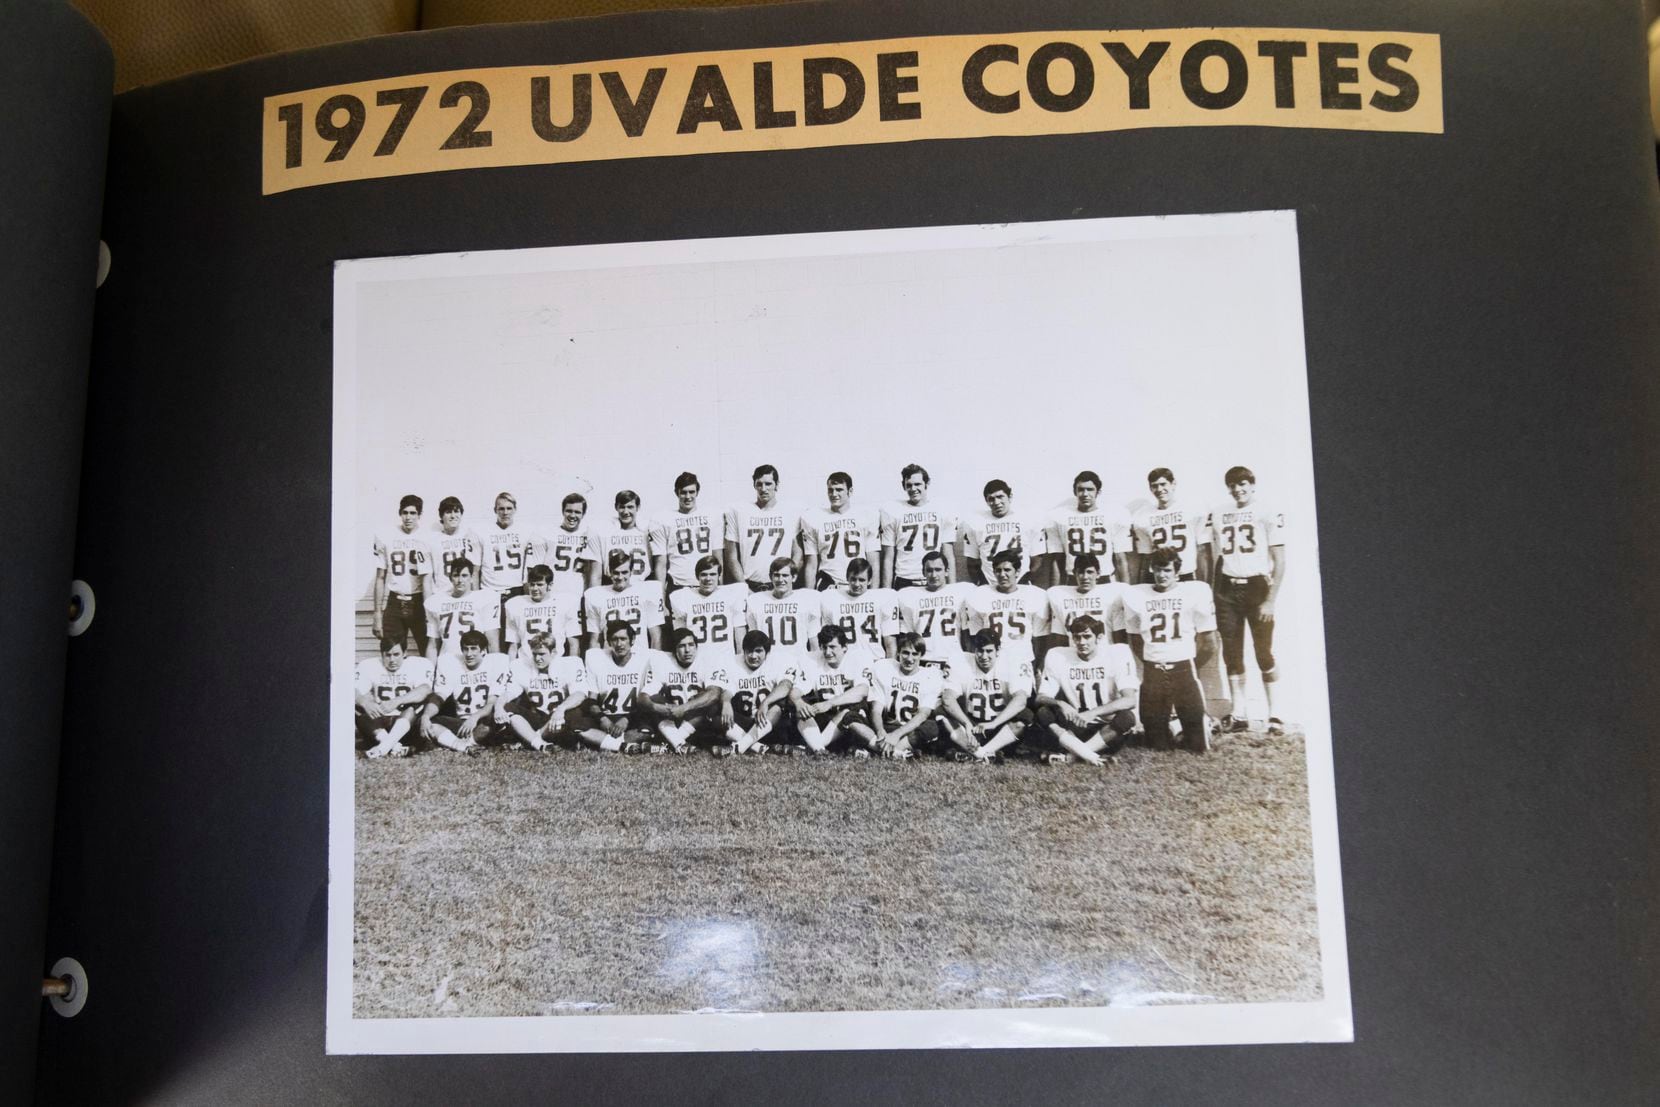 A photo of the 1972 Uvalde football state champions on Wednesday, Aug. 10, 2022, in Uvalde, TX.